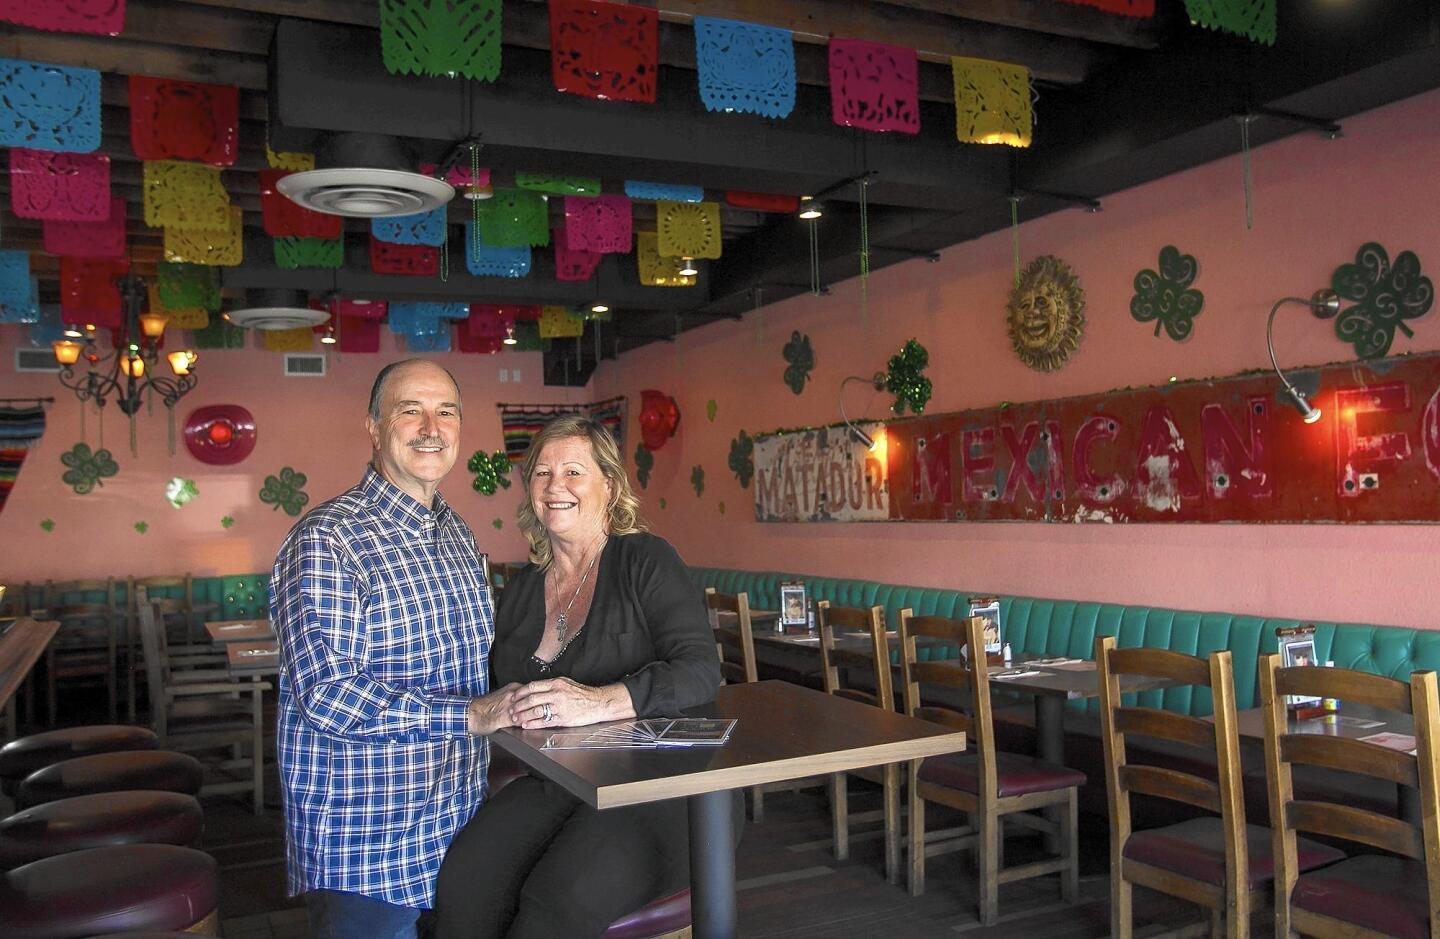 Greg and Jana McConaughy have owned El Matador restaurant in Costa Mesa since 2005. The establishment first opened in 1966.